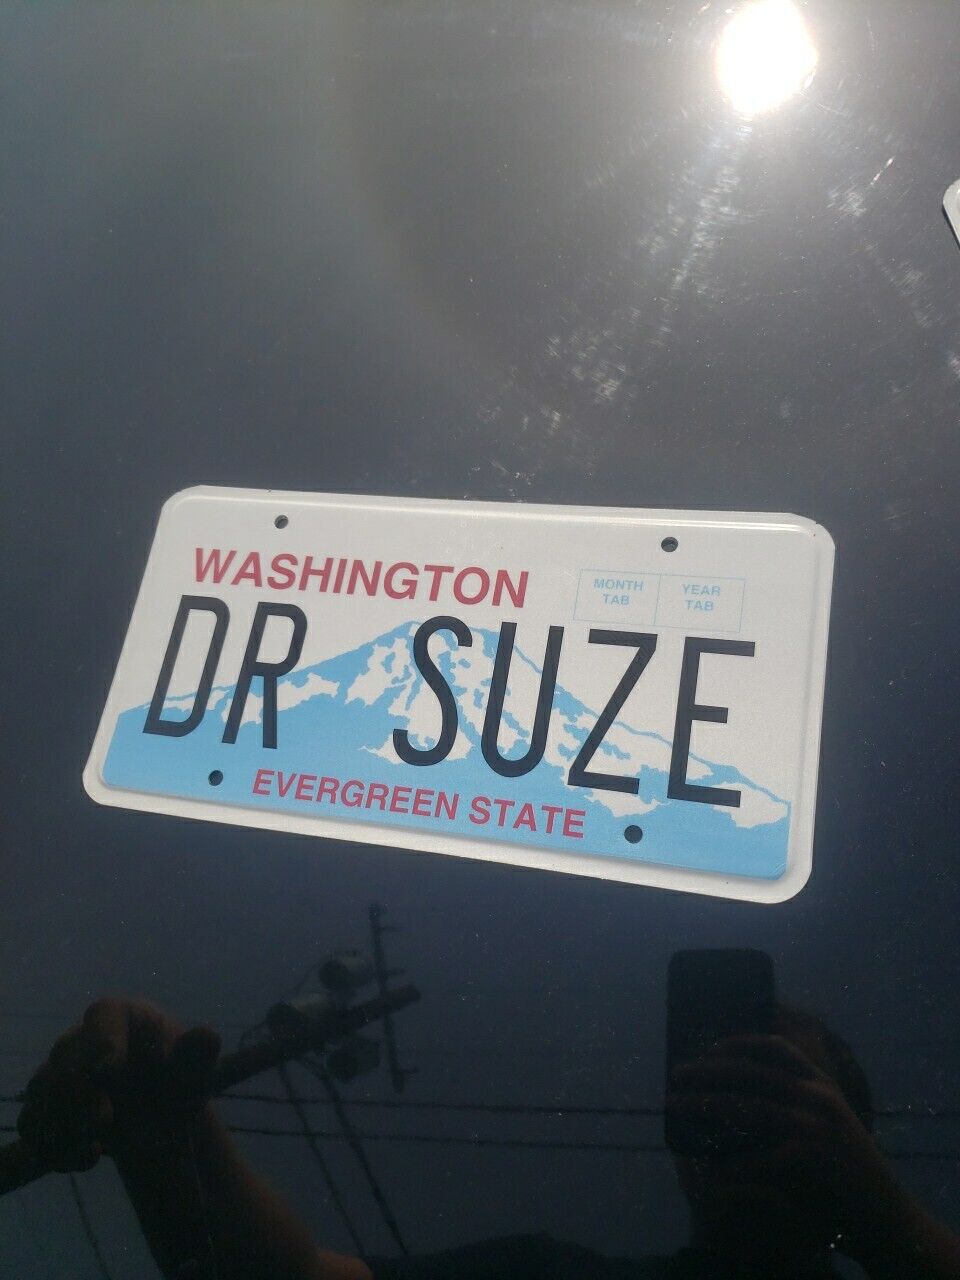 Real custom vanity license plate Washington State DR SUZE *Seuss* SEE